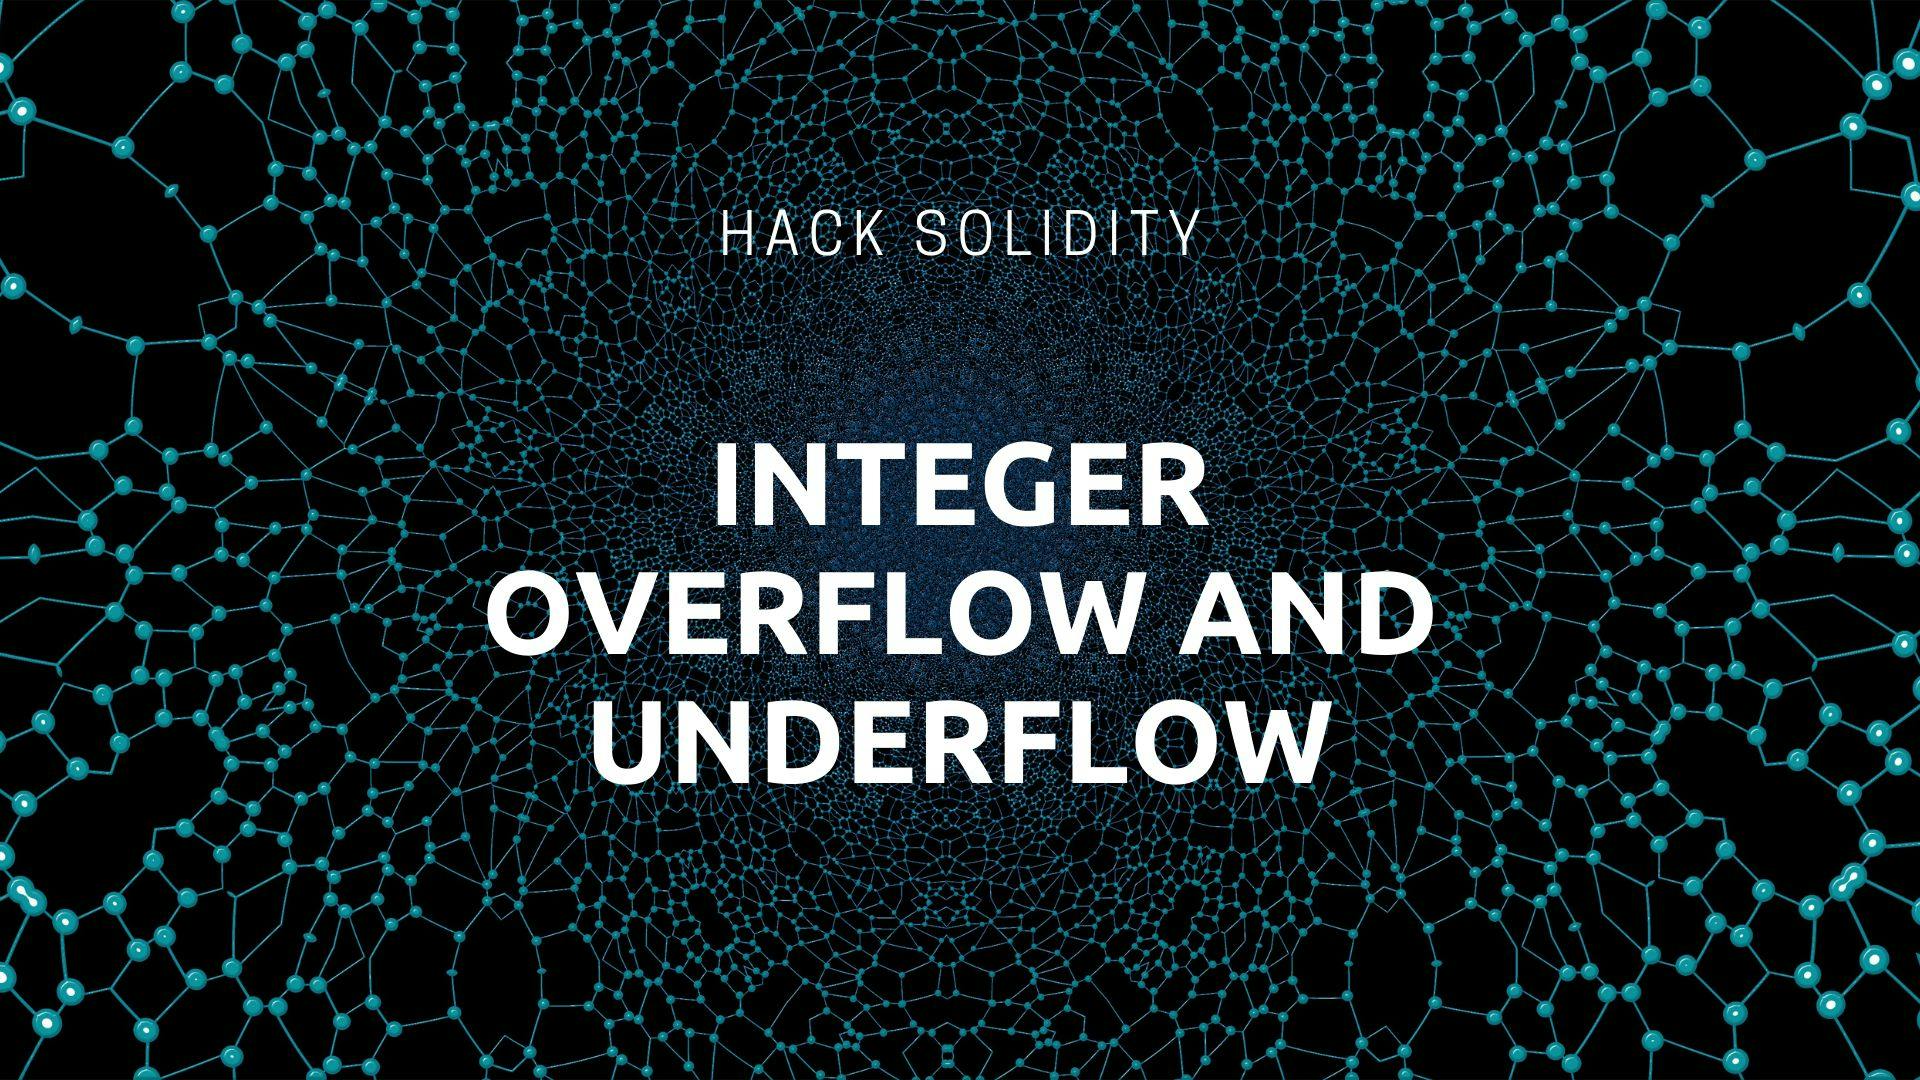 featured image - Hack Solidity: Integer Overflow and Underflow